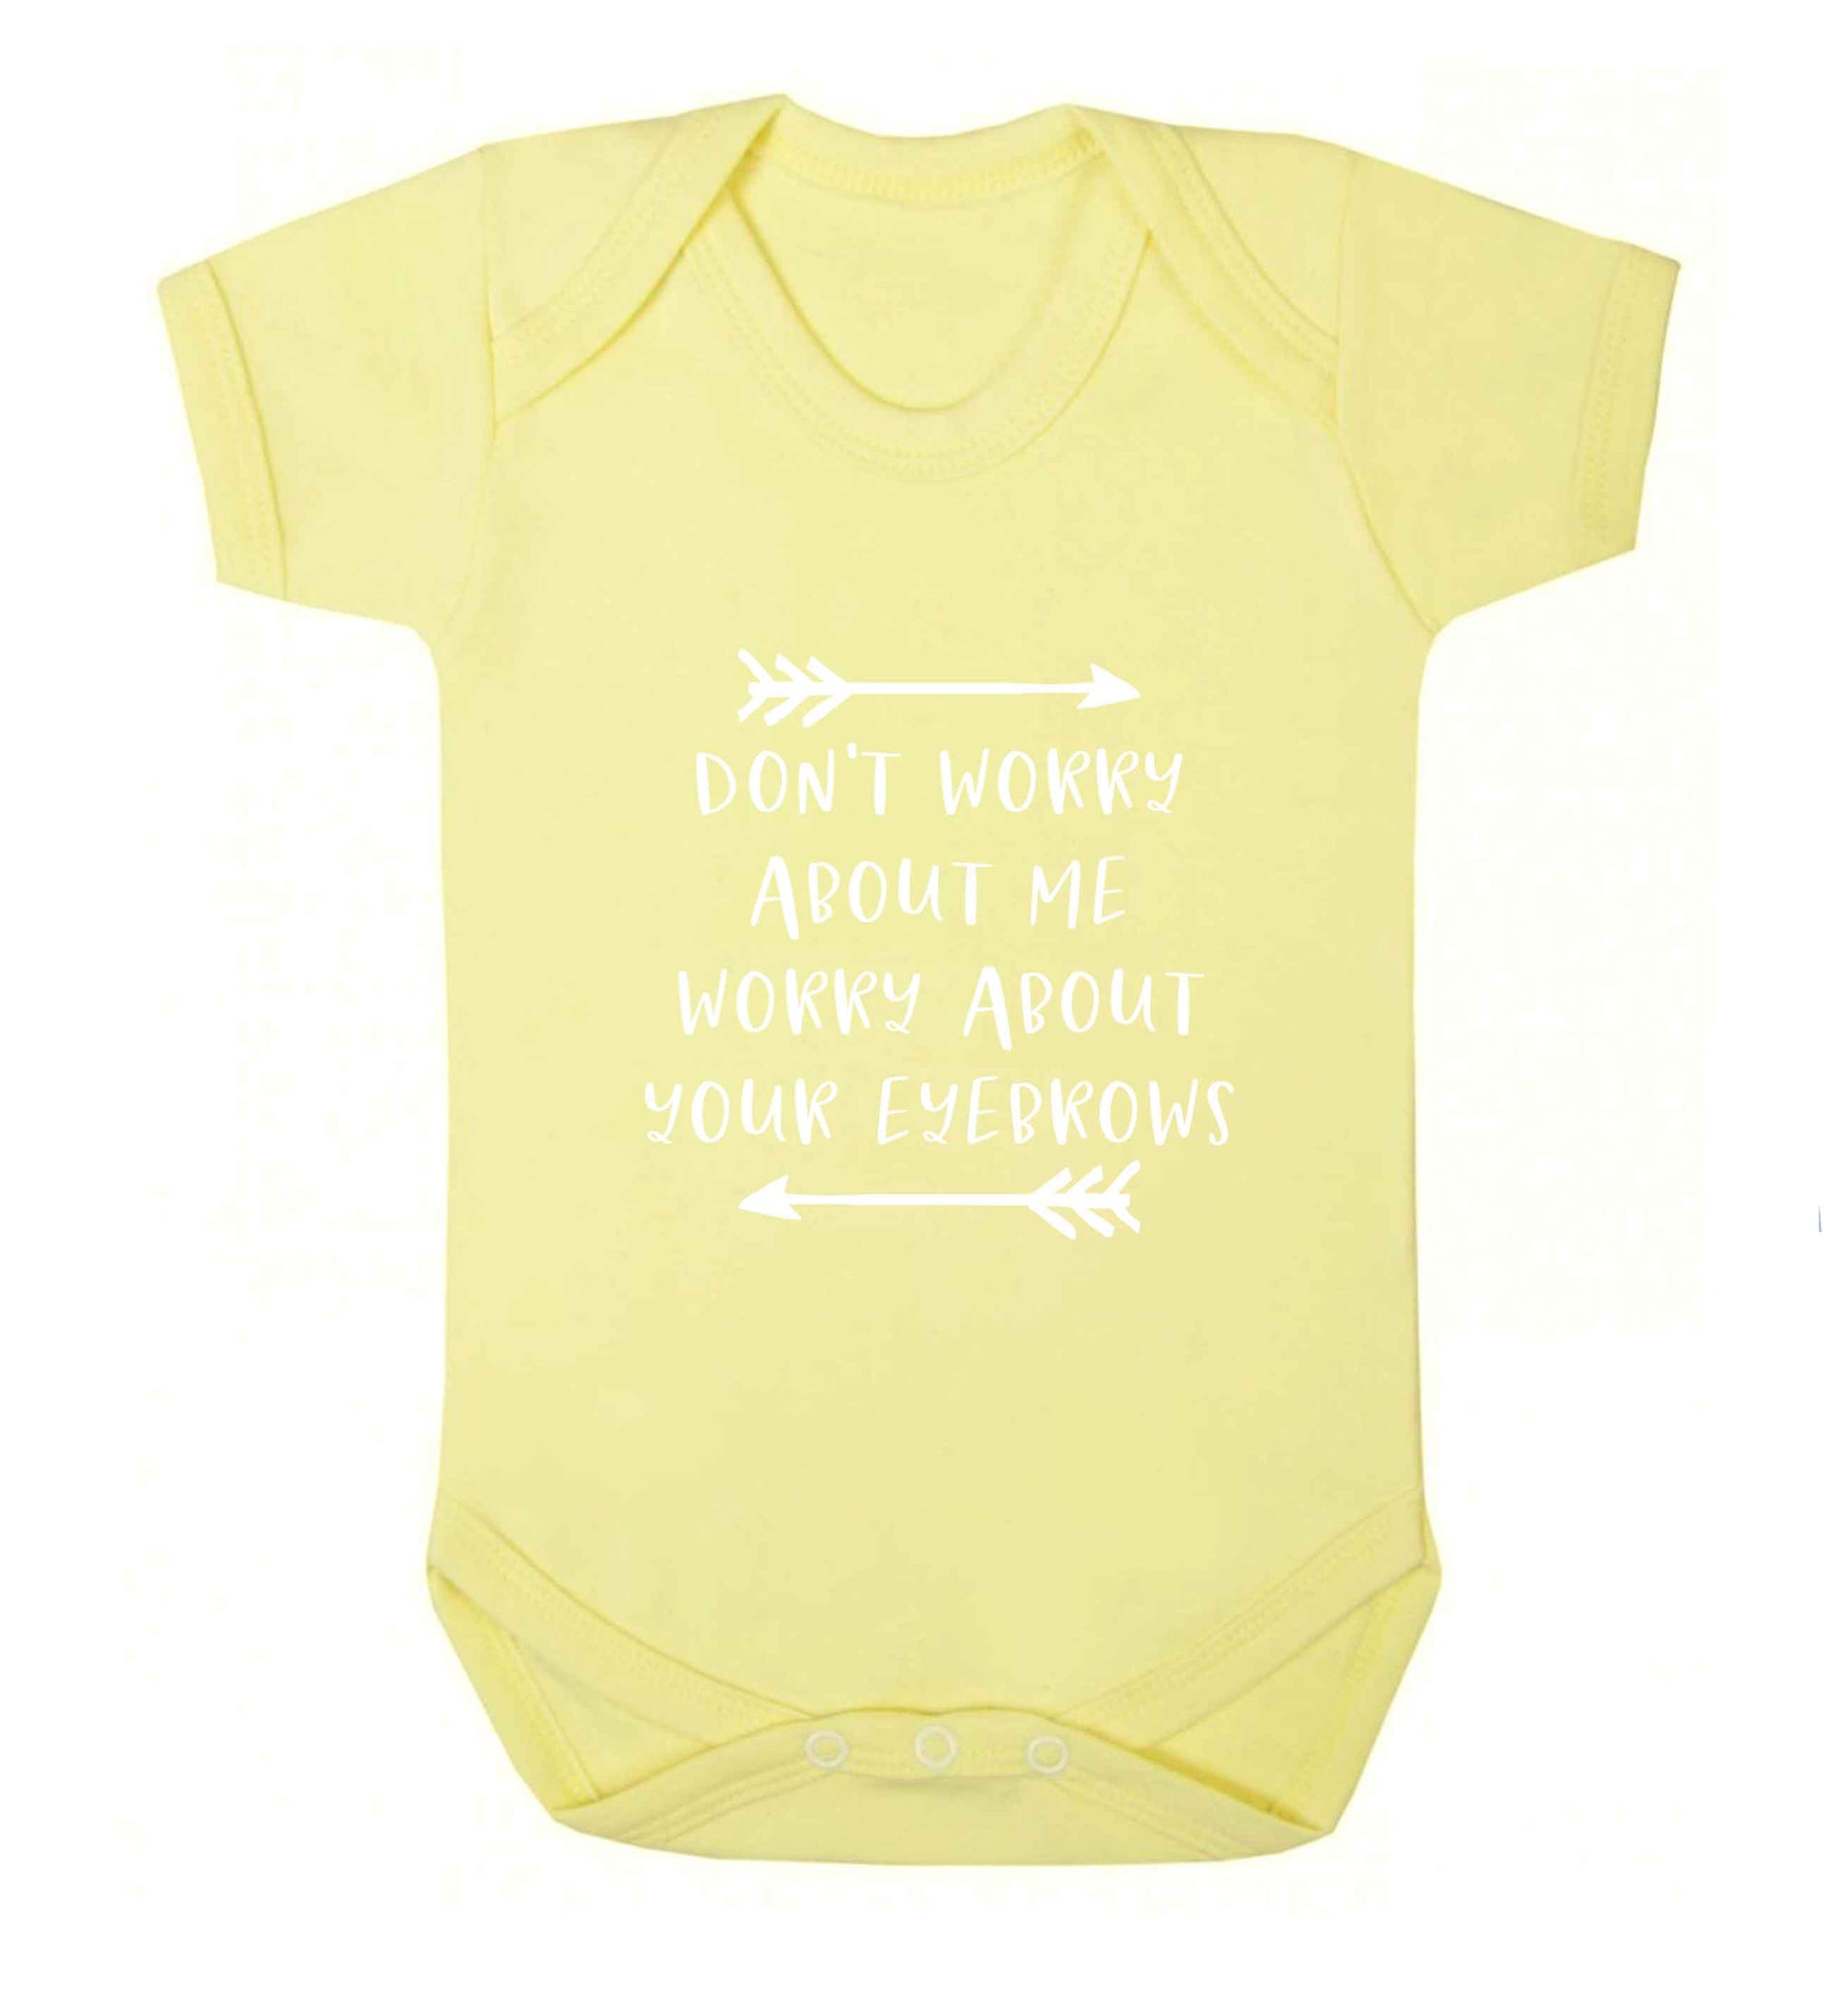 Don't worry about me worry about your eyebrows baby vest pale yellow 18-24 months